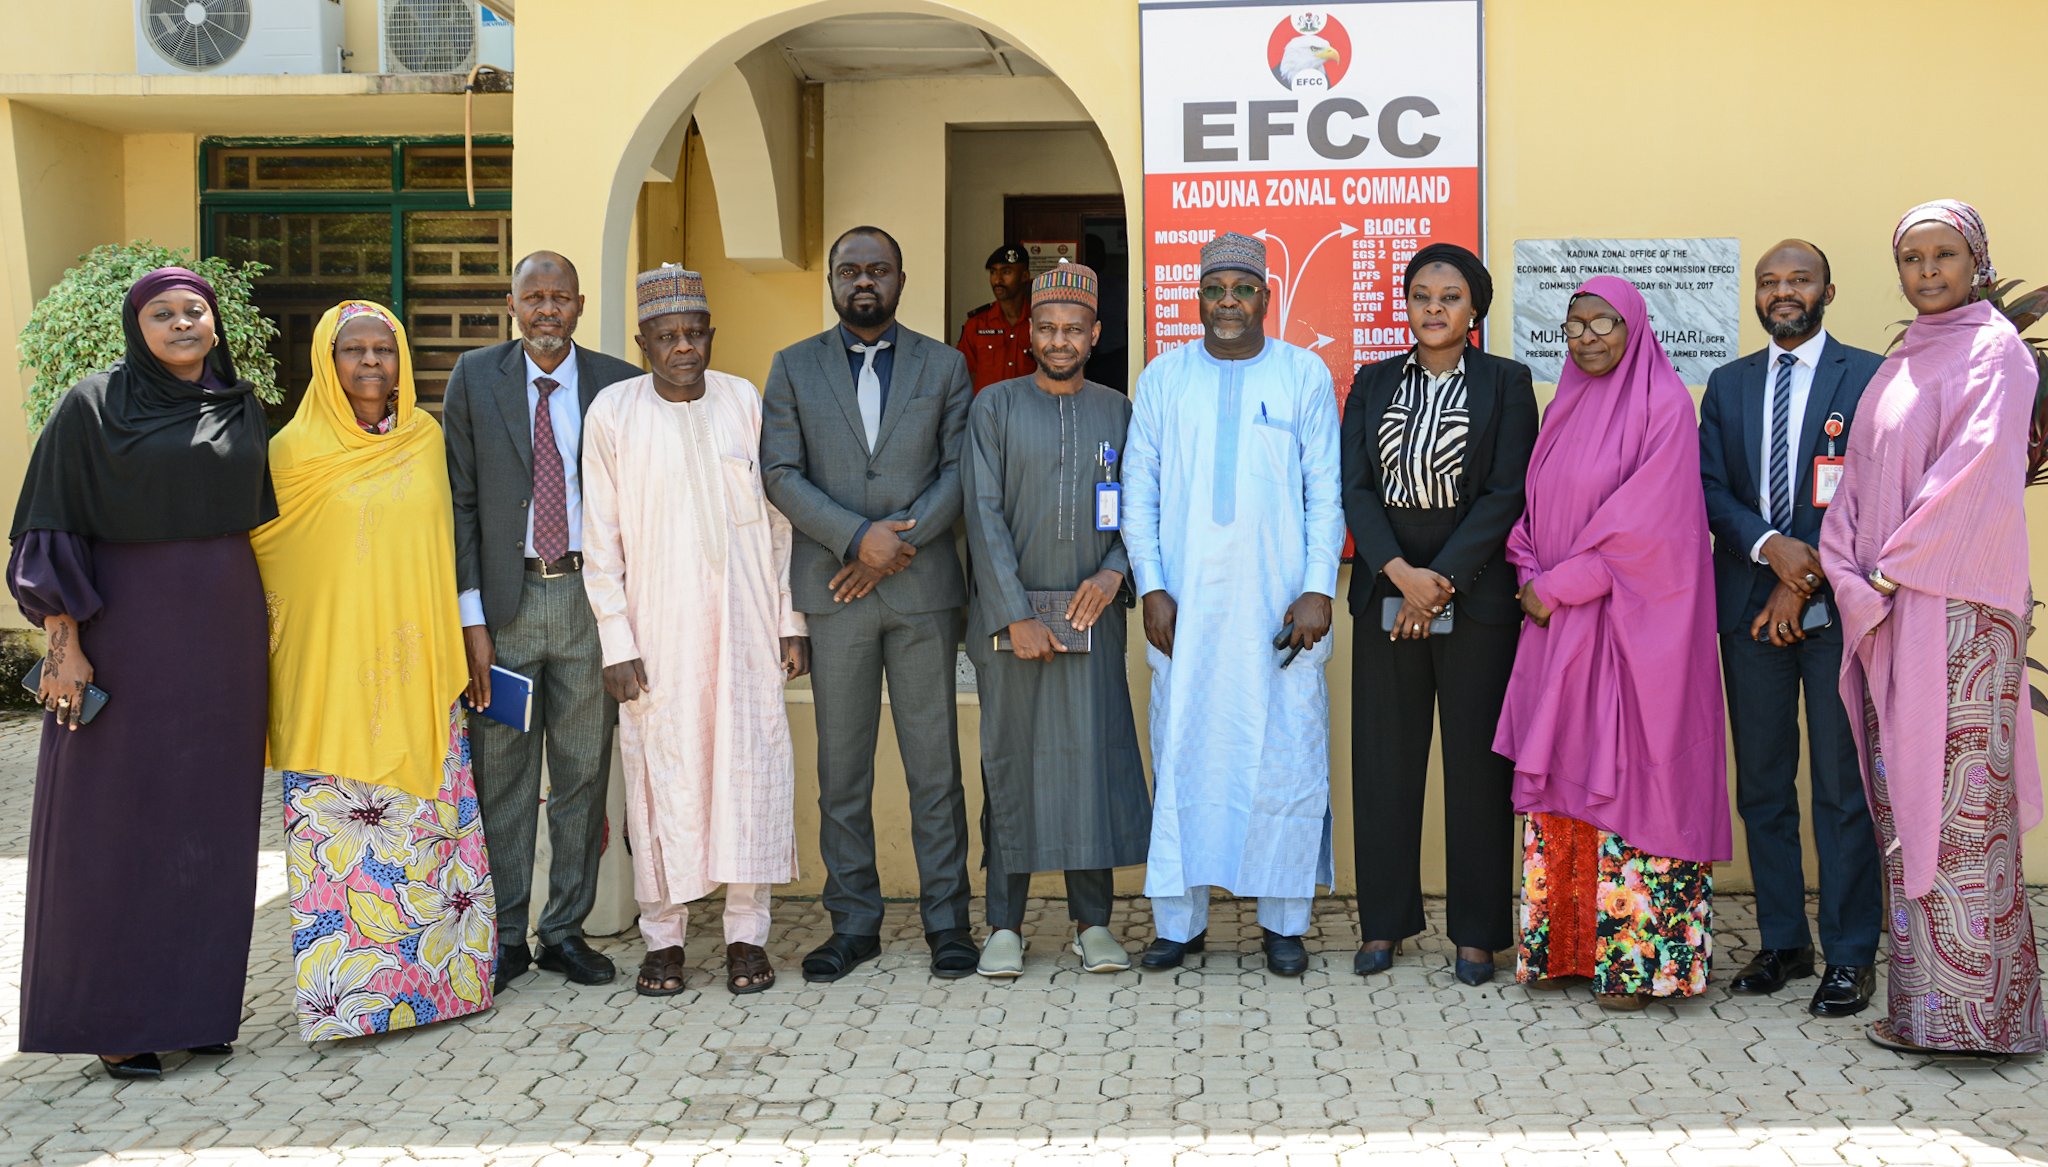 INEC commends EFCC for professionalism during 2023 general election